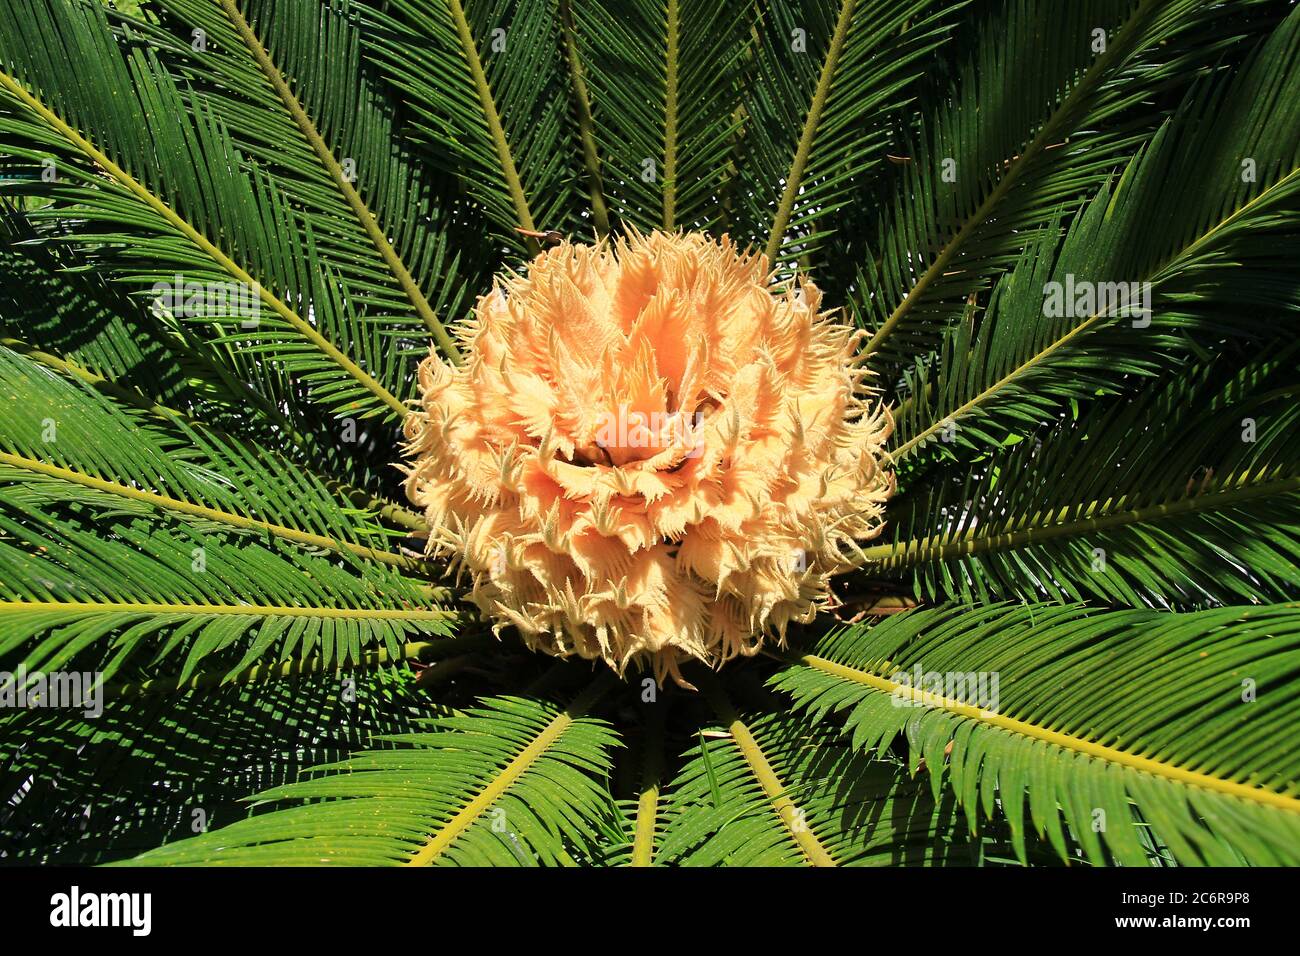 Cycas revoluta female palm tree flower blossom into evergreen leaves at summer Stock Photo